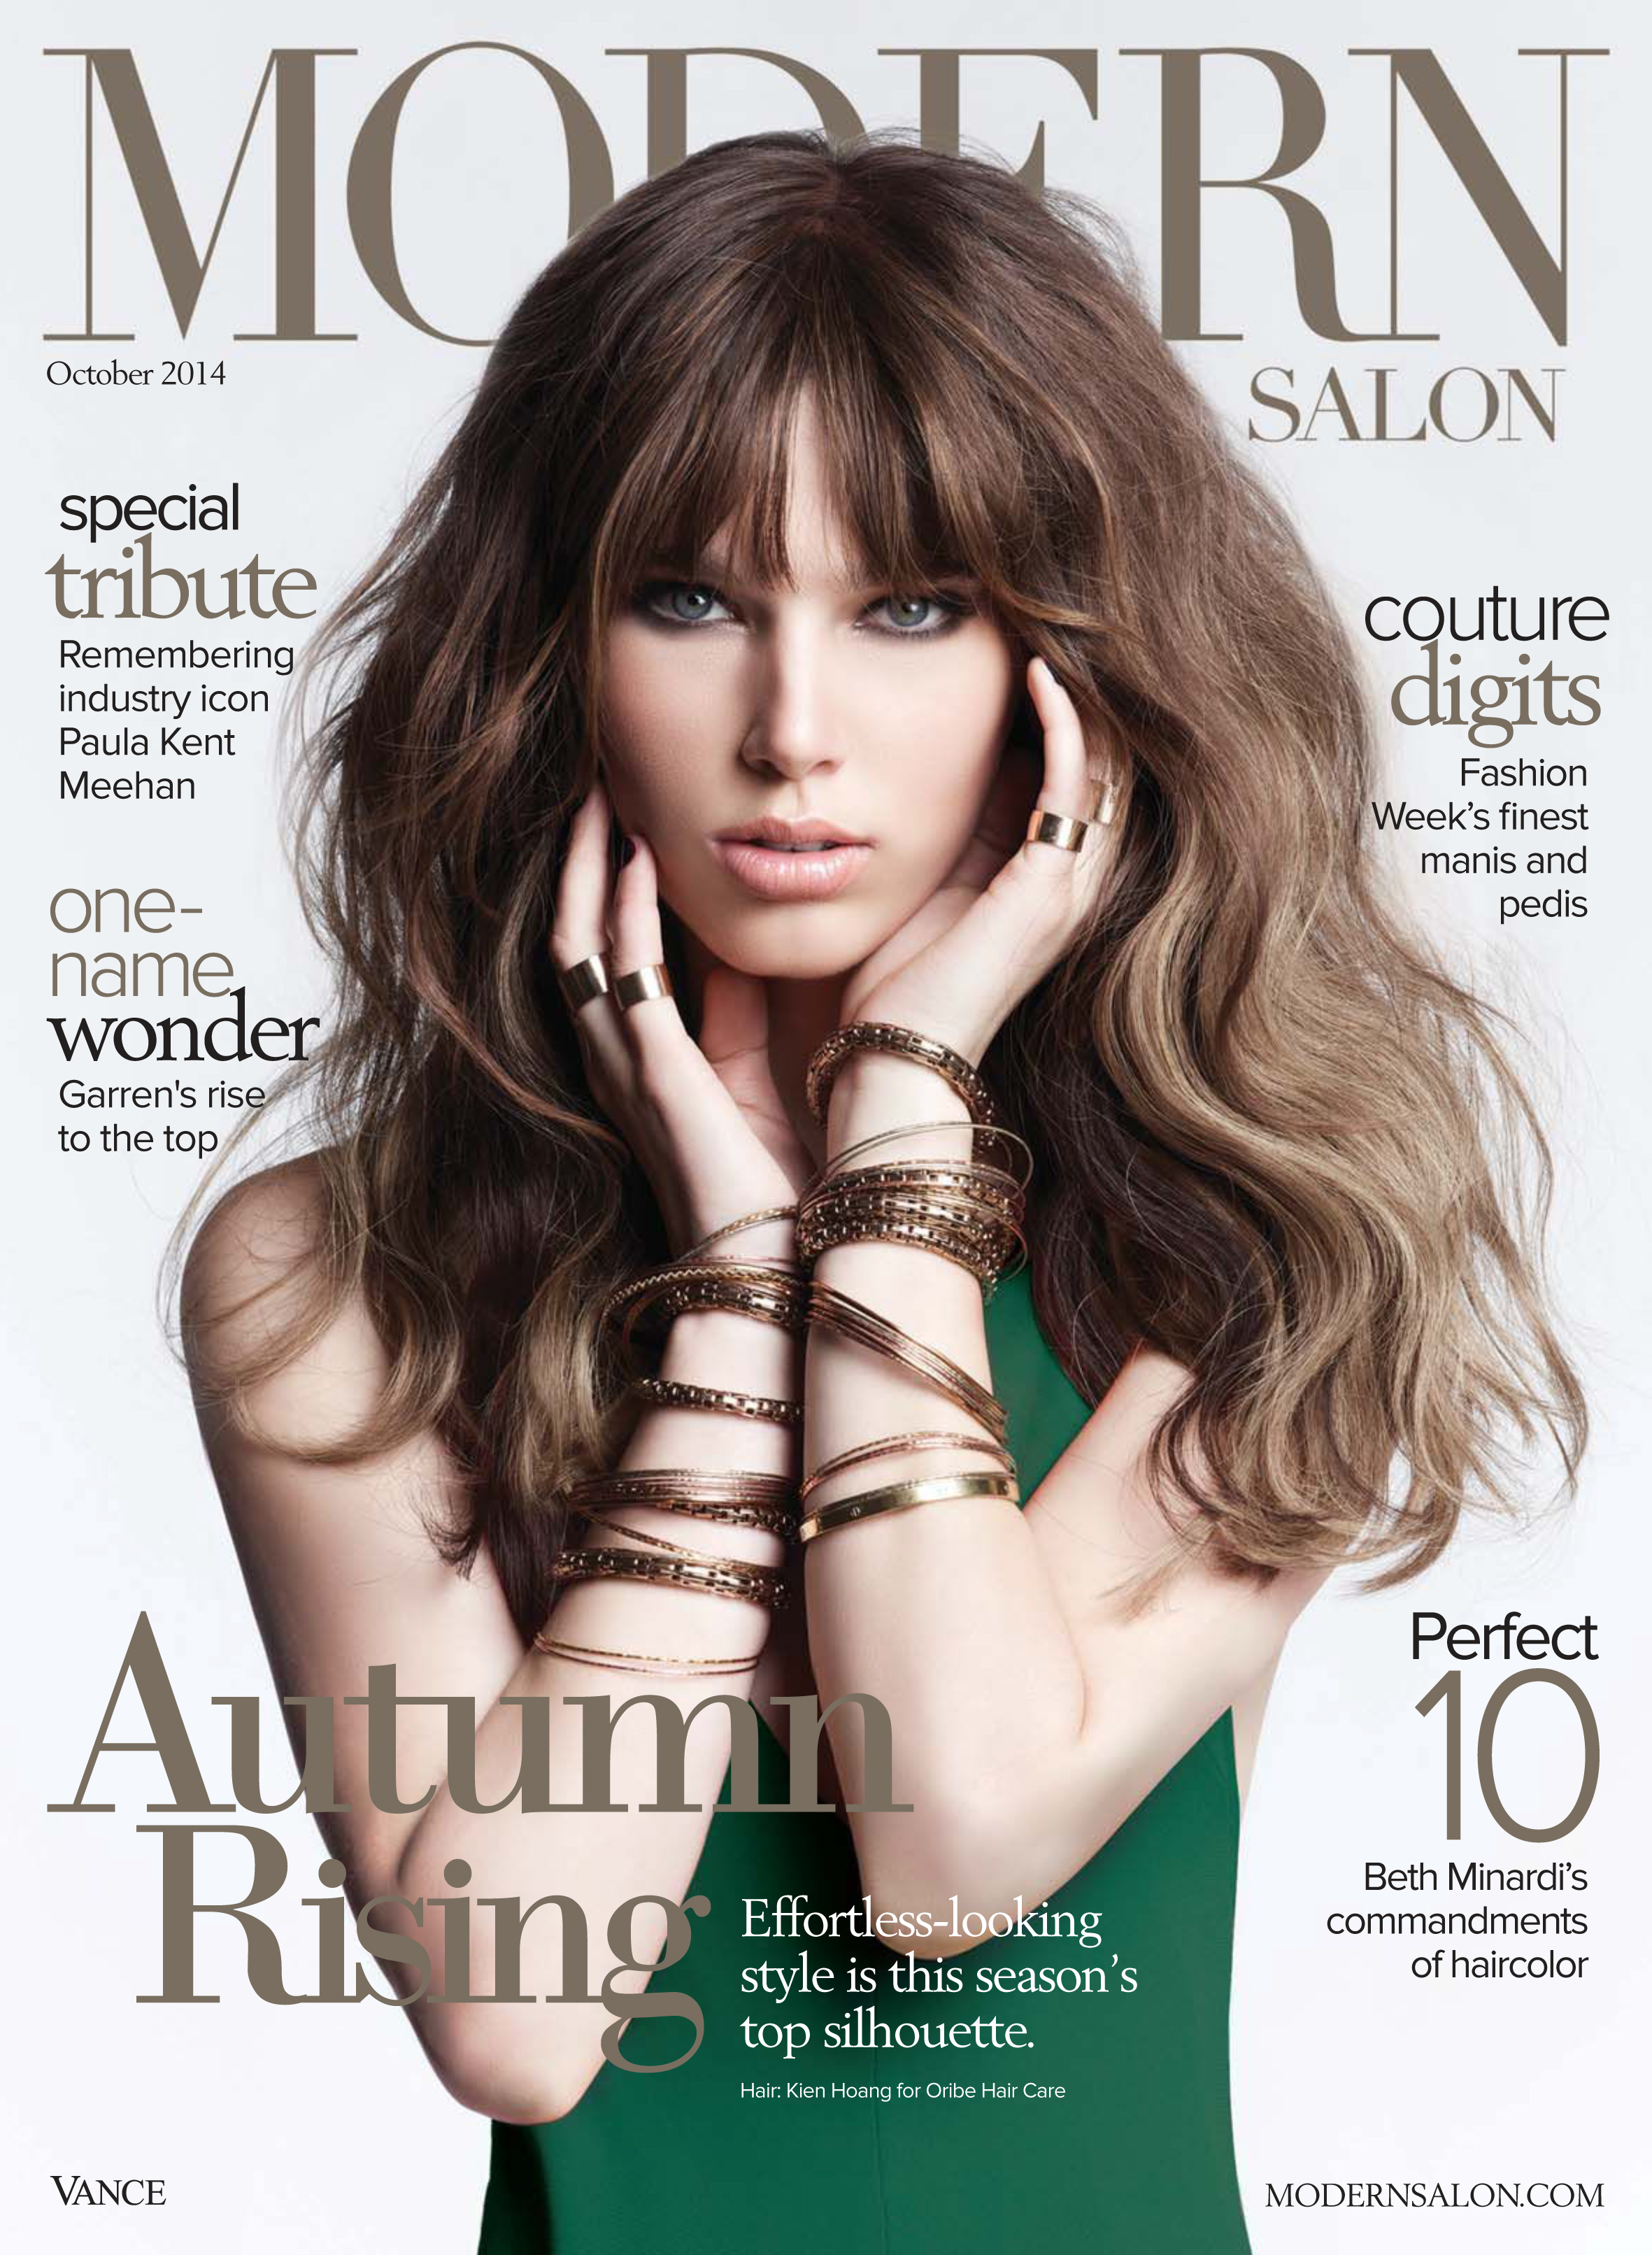 Modern Salon Cover | October Issue | Hair by Kien Hoang